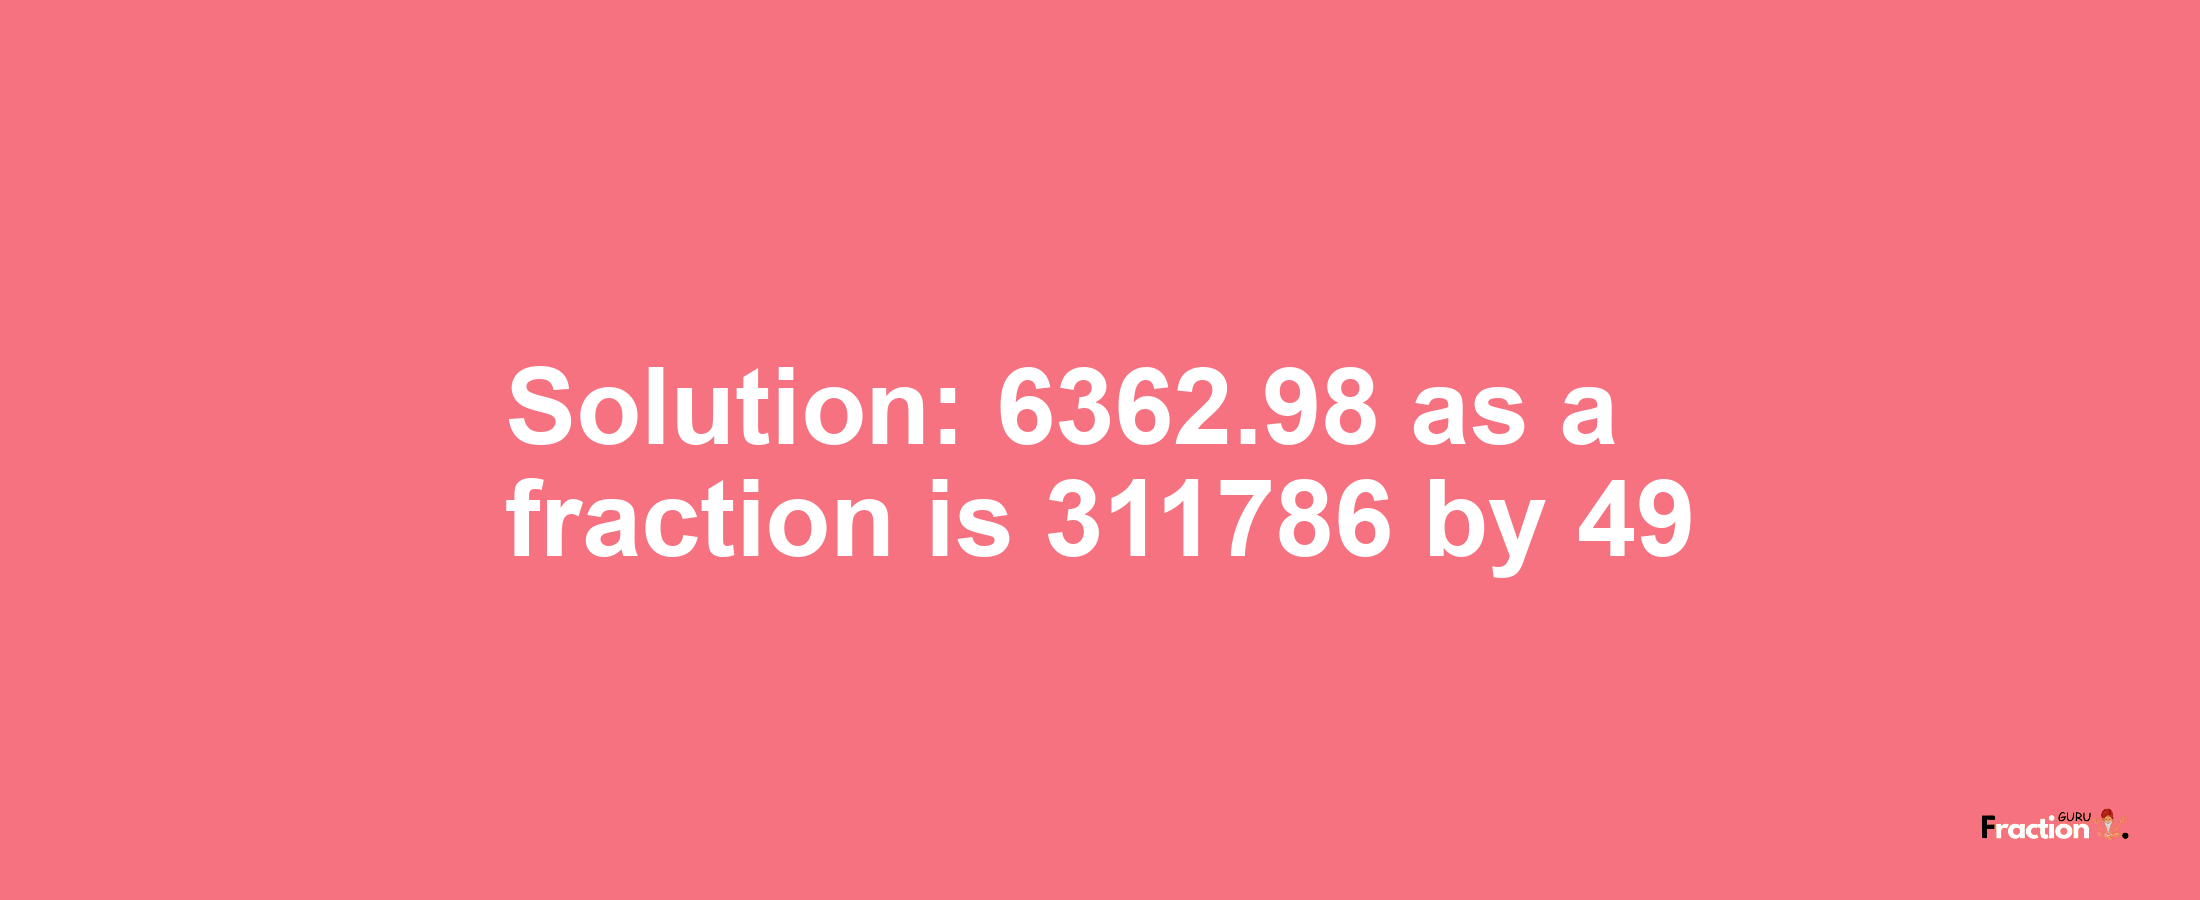 Solution:6362.98 as a fraction is 311786/49